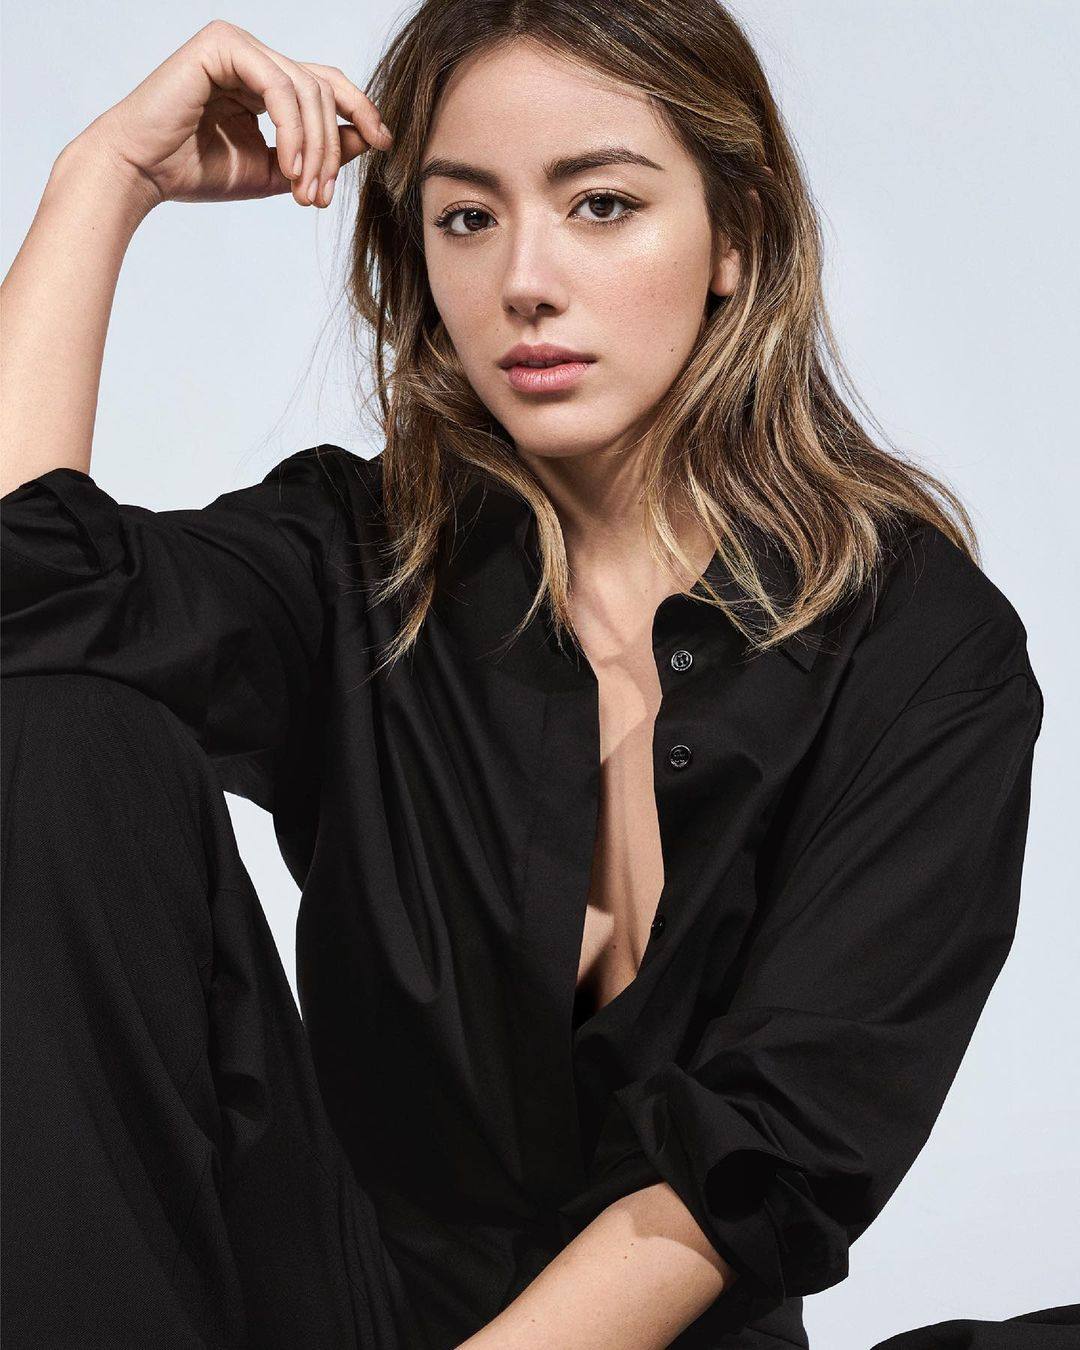 Who is Chloe Bennet, and did Charli XCX just write a song about her? Photo: @chloebennet/Instagram